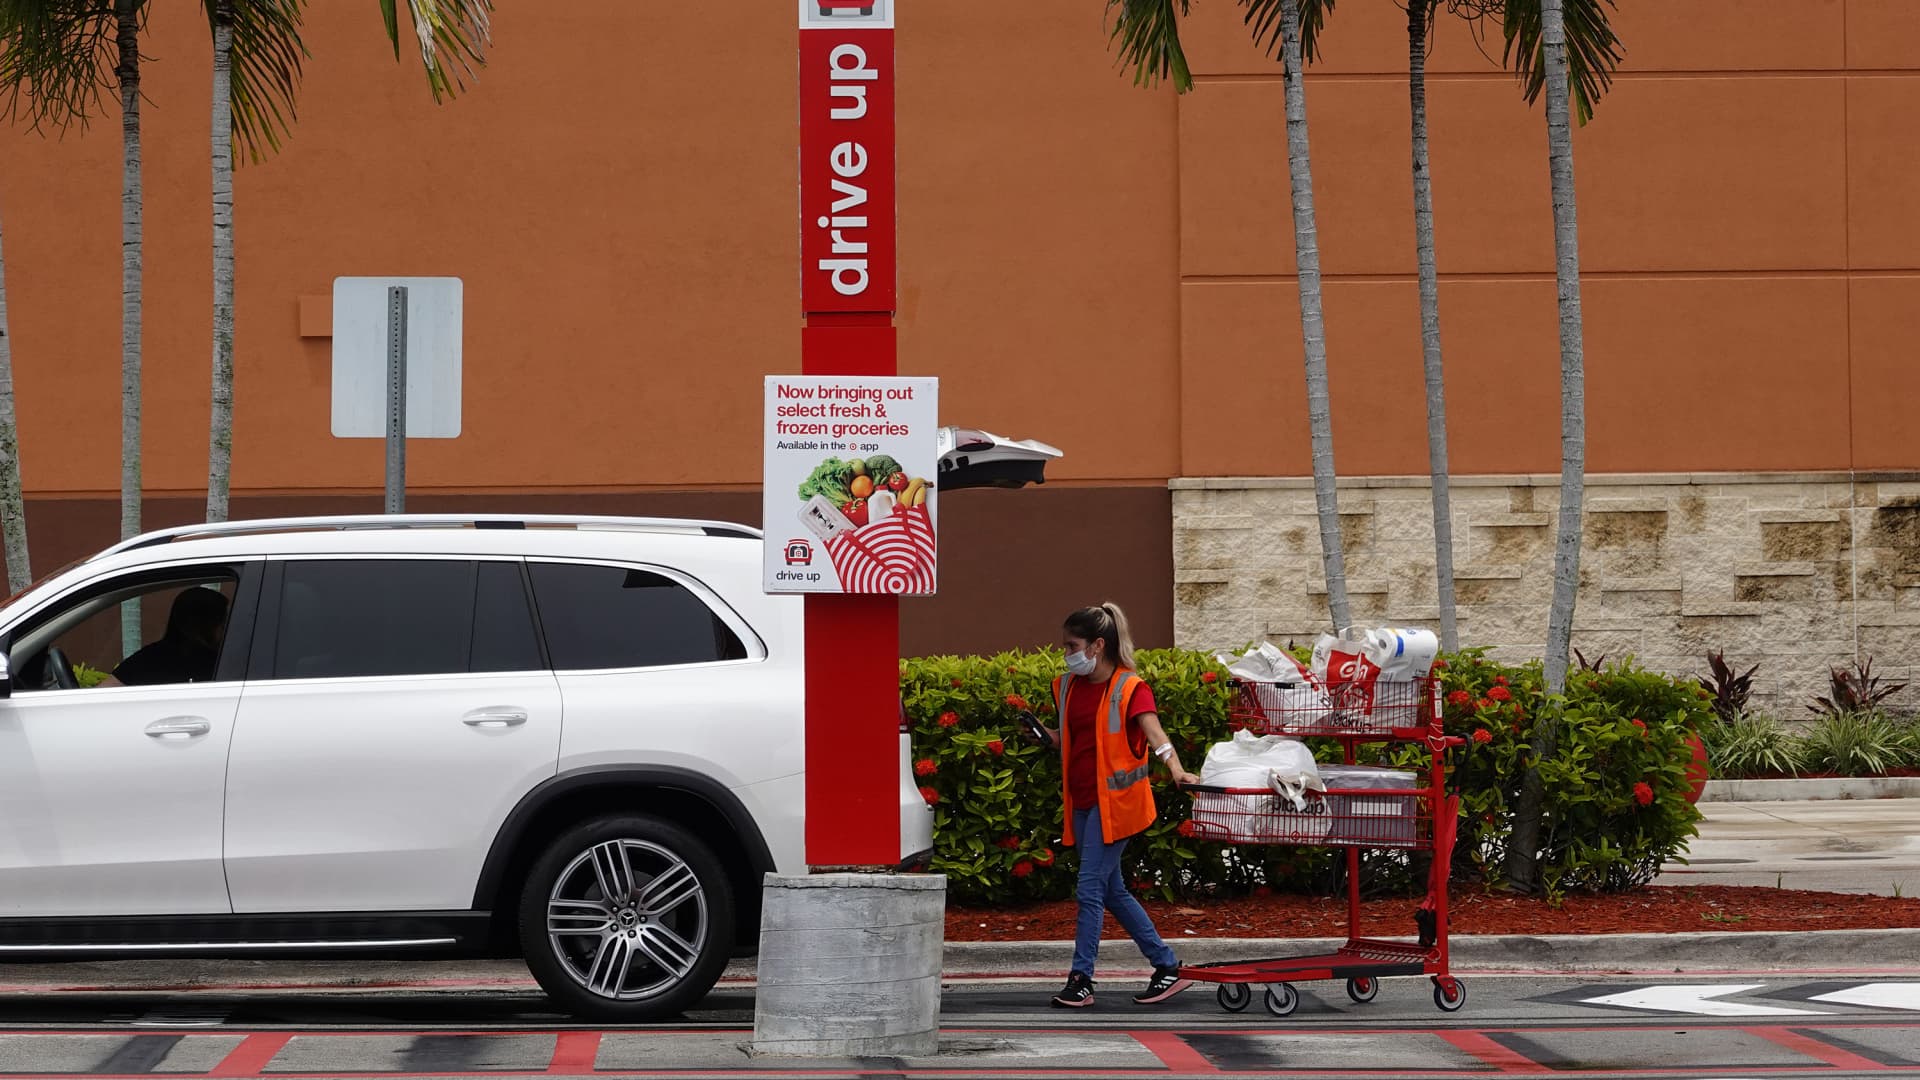 Target to add Starbucks curbside pickup across the country